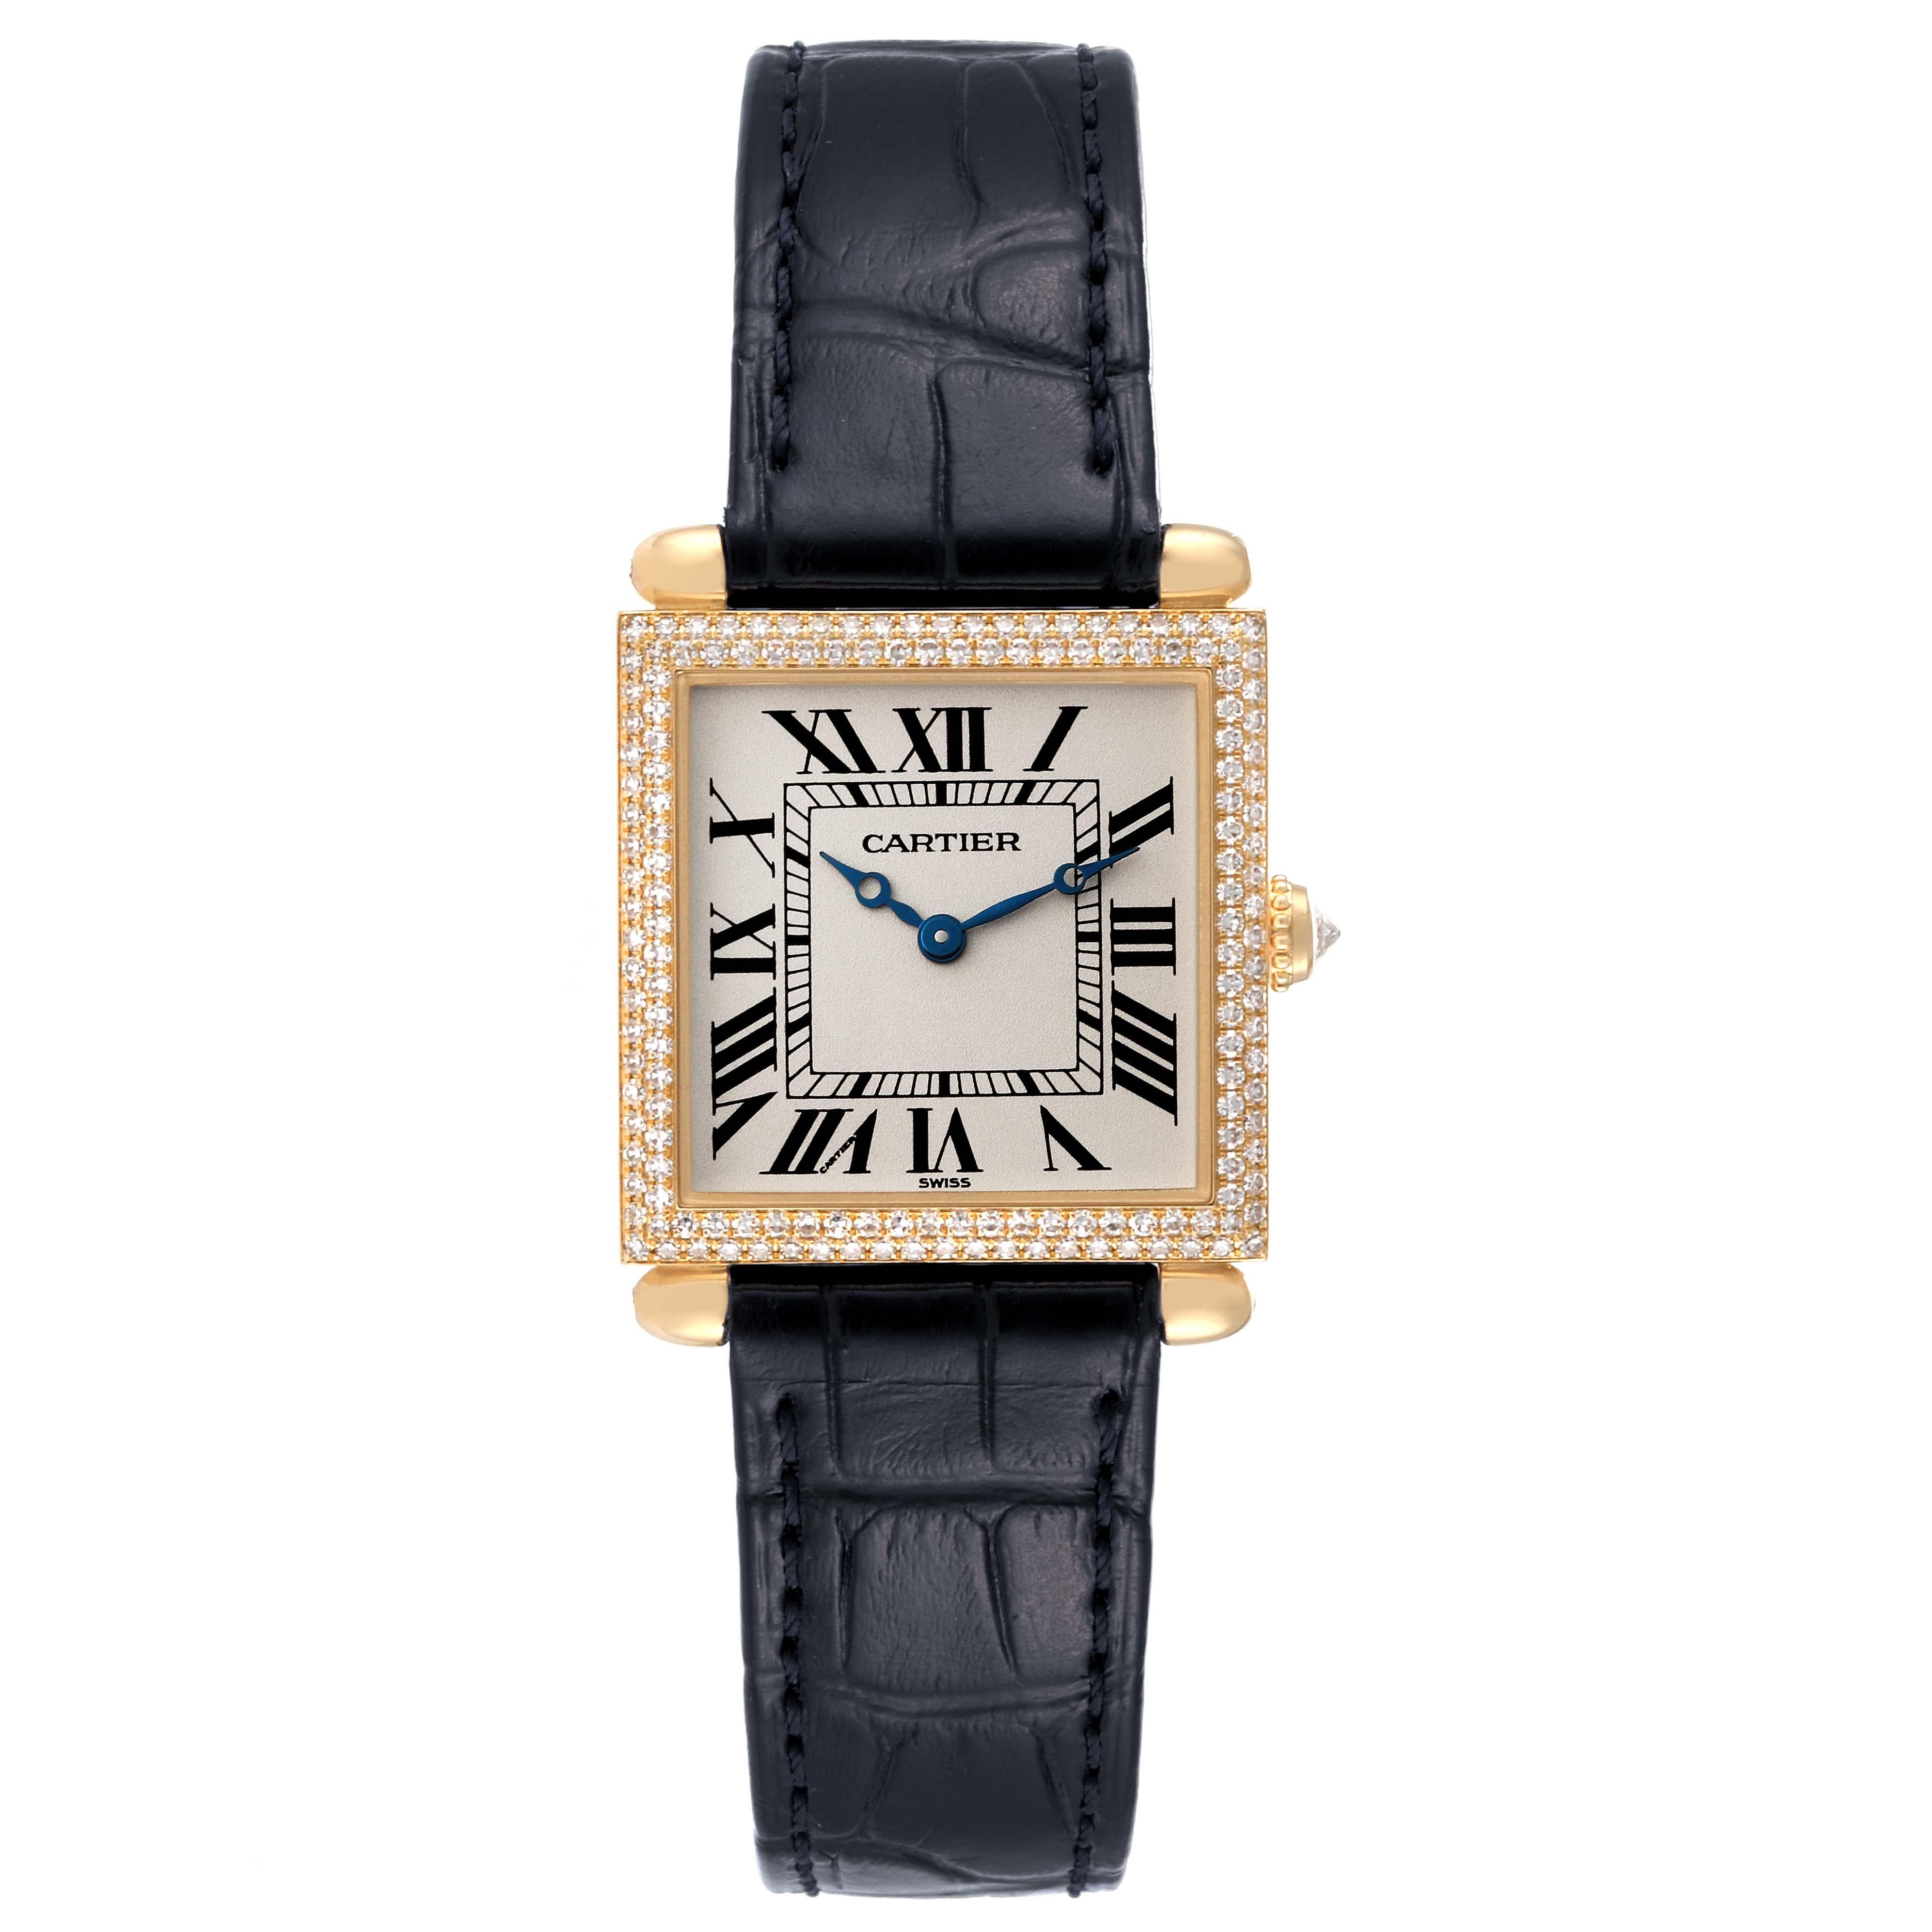 Cartier Tank Obus Prevee Collection Yellow Gold Diamond Ladies Watch WB800251. Quartz movement. 18k yellow gold square case 24.5 x 24.5 mm (31 mm with lugs). Rounded bullet lugs. Circular grained crown set with an original Cartier factory diamond.